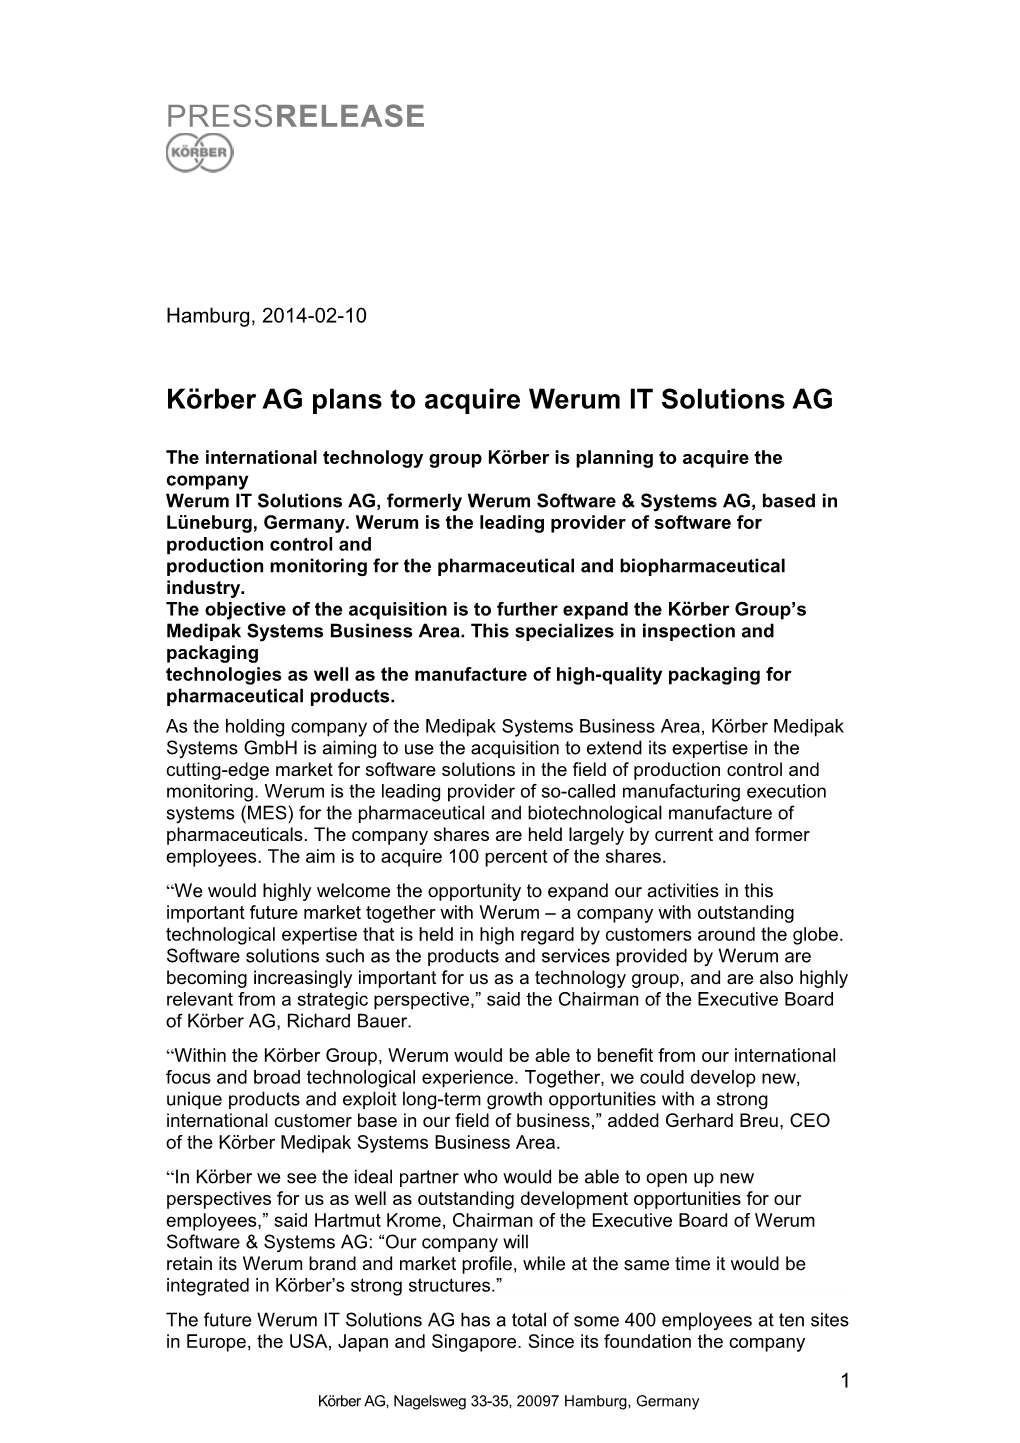 Körber AG Plans to Acquire Werum IT Solutions AG